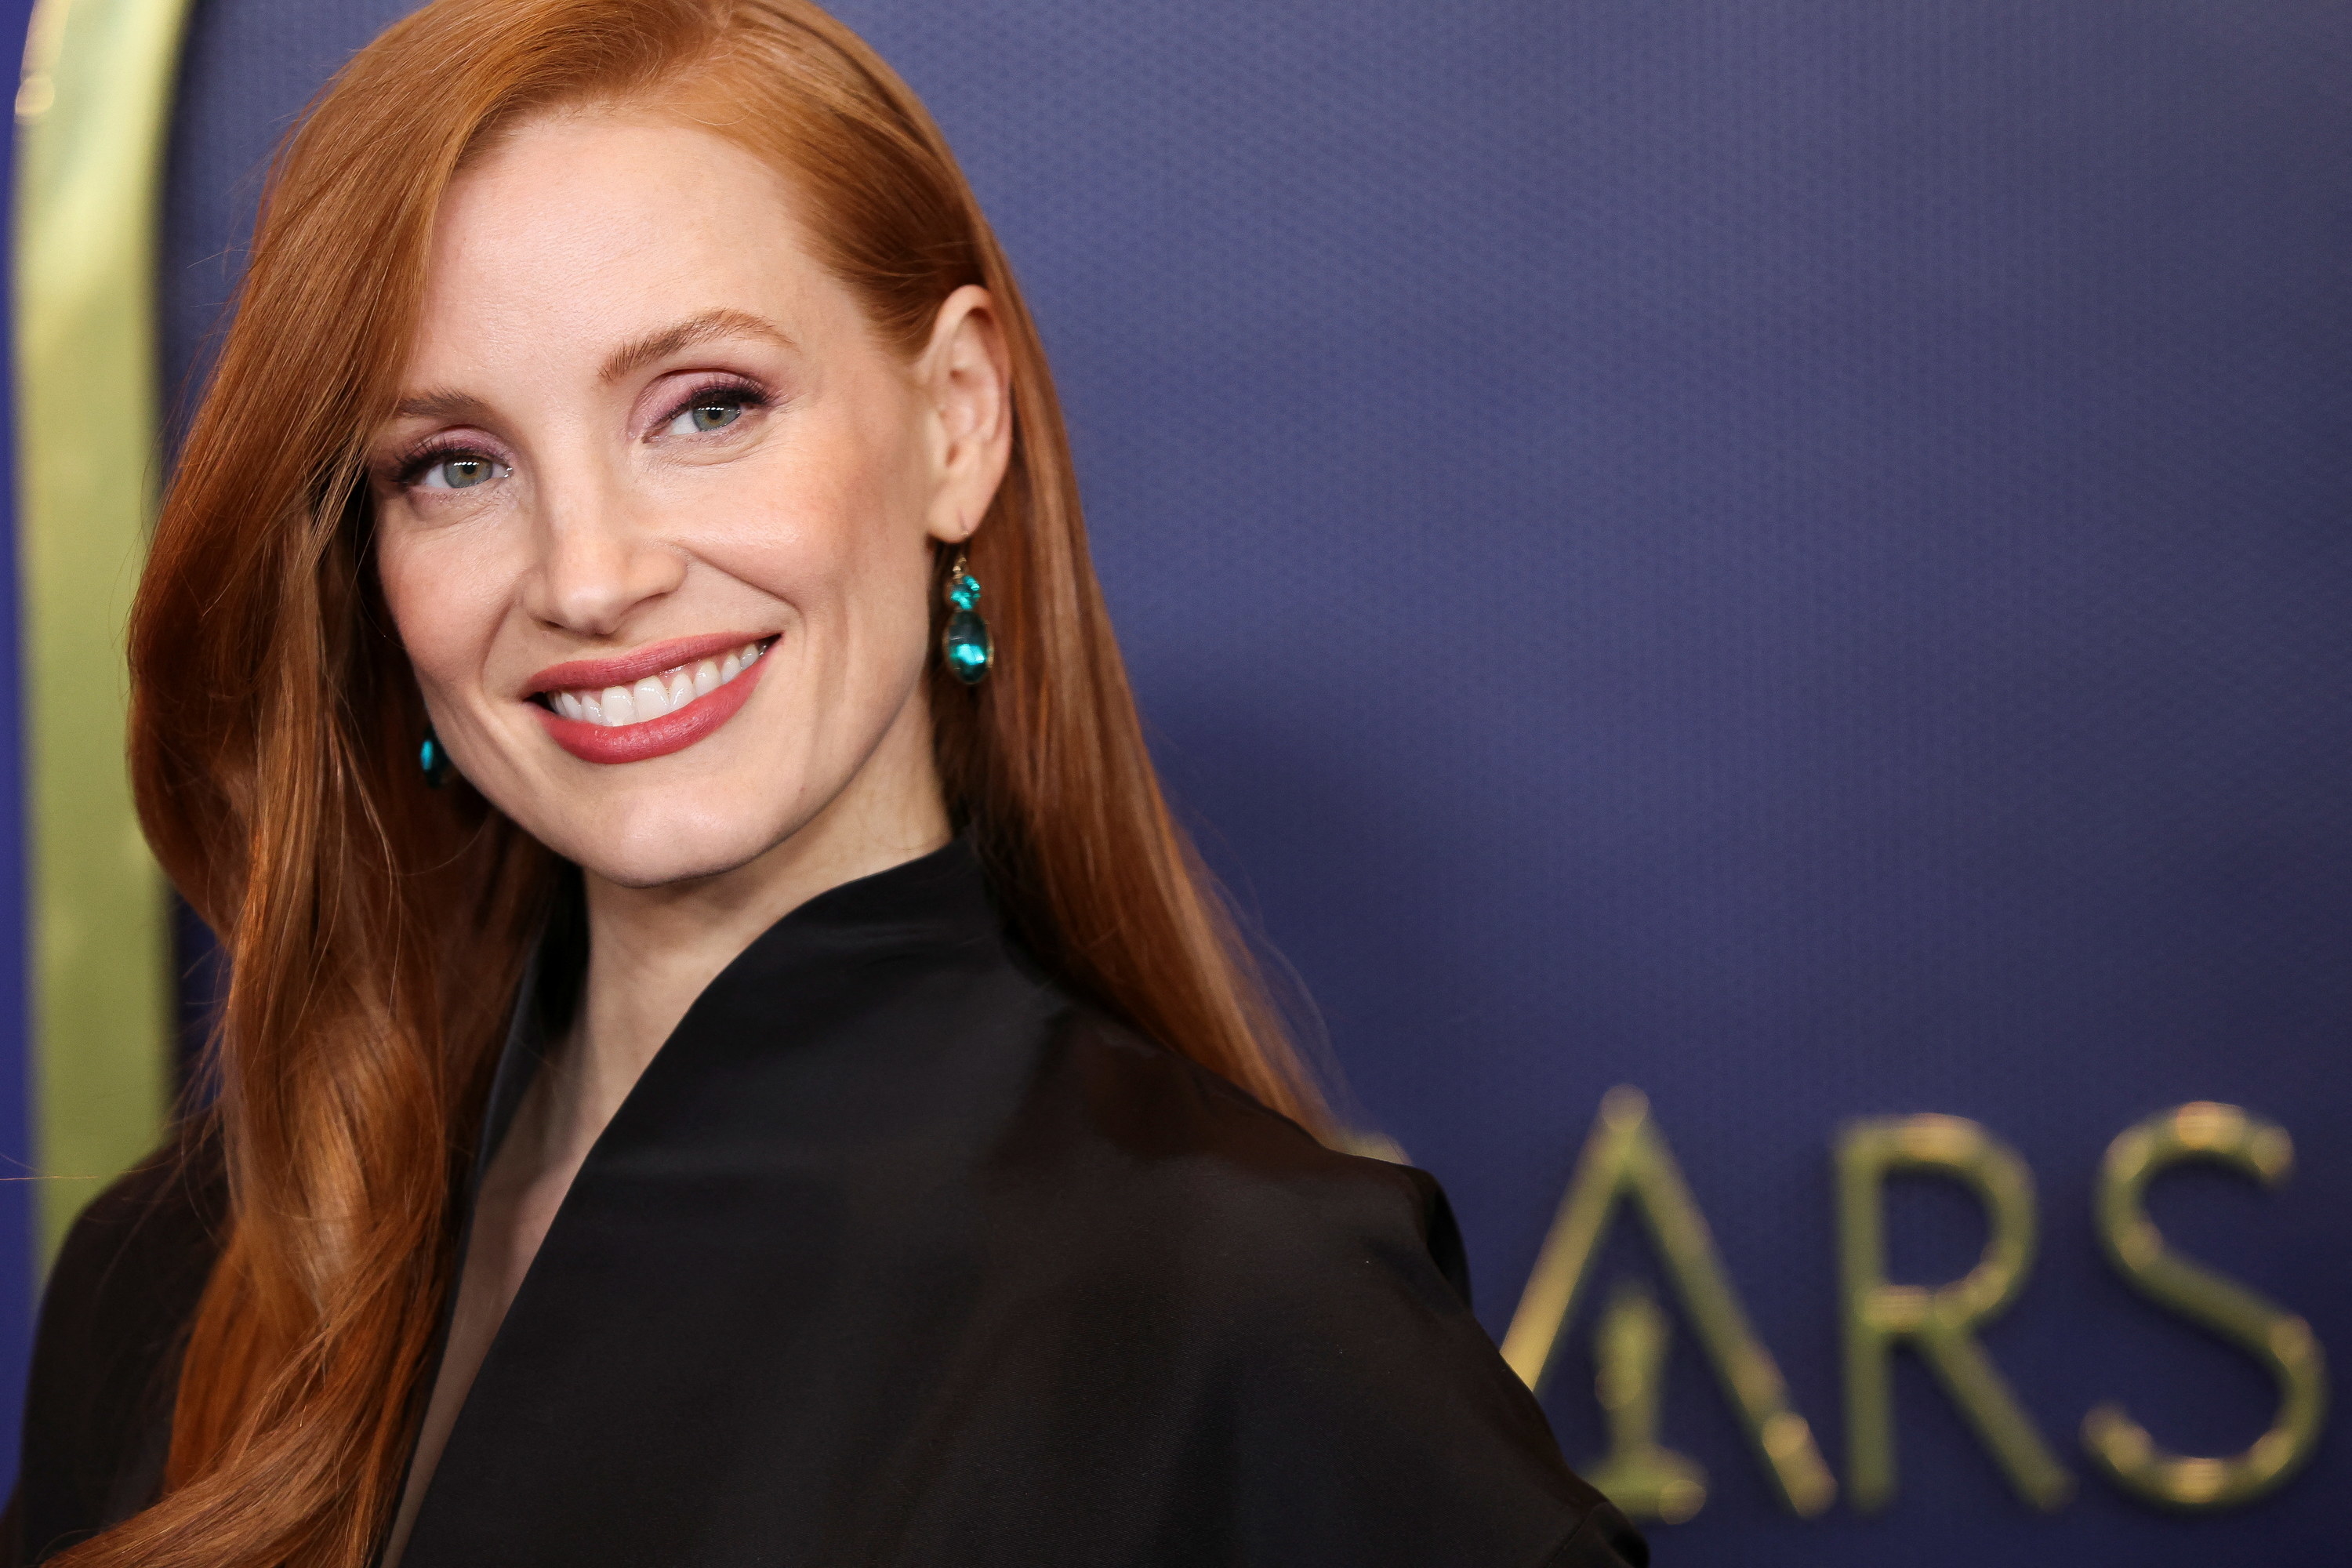 Jessica Chastain and large earrings smiling at something off camera